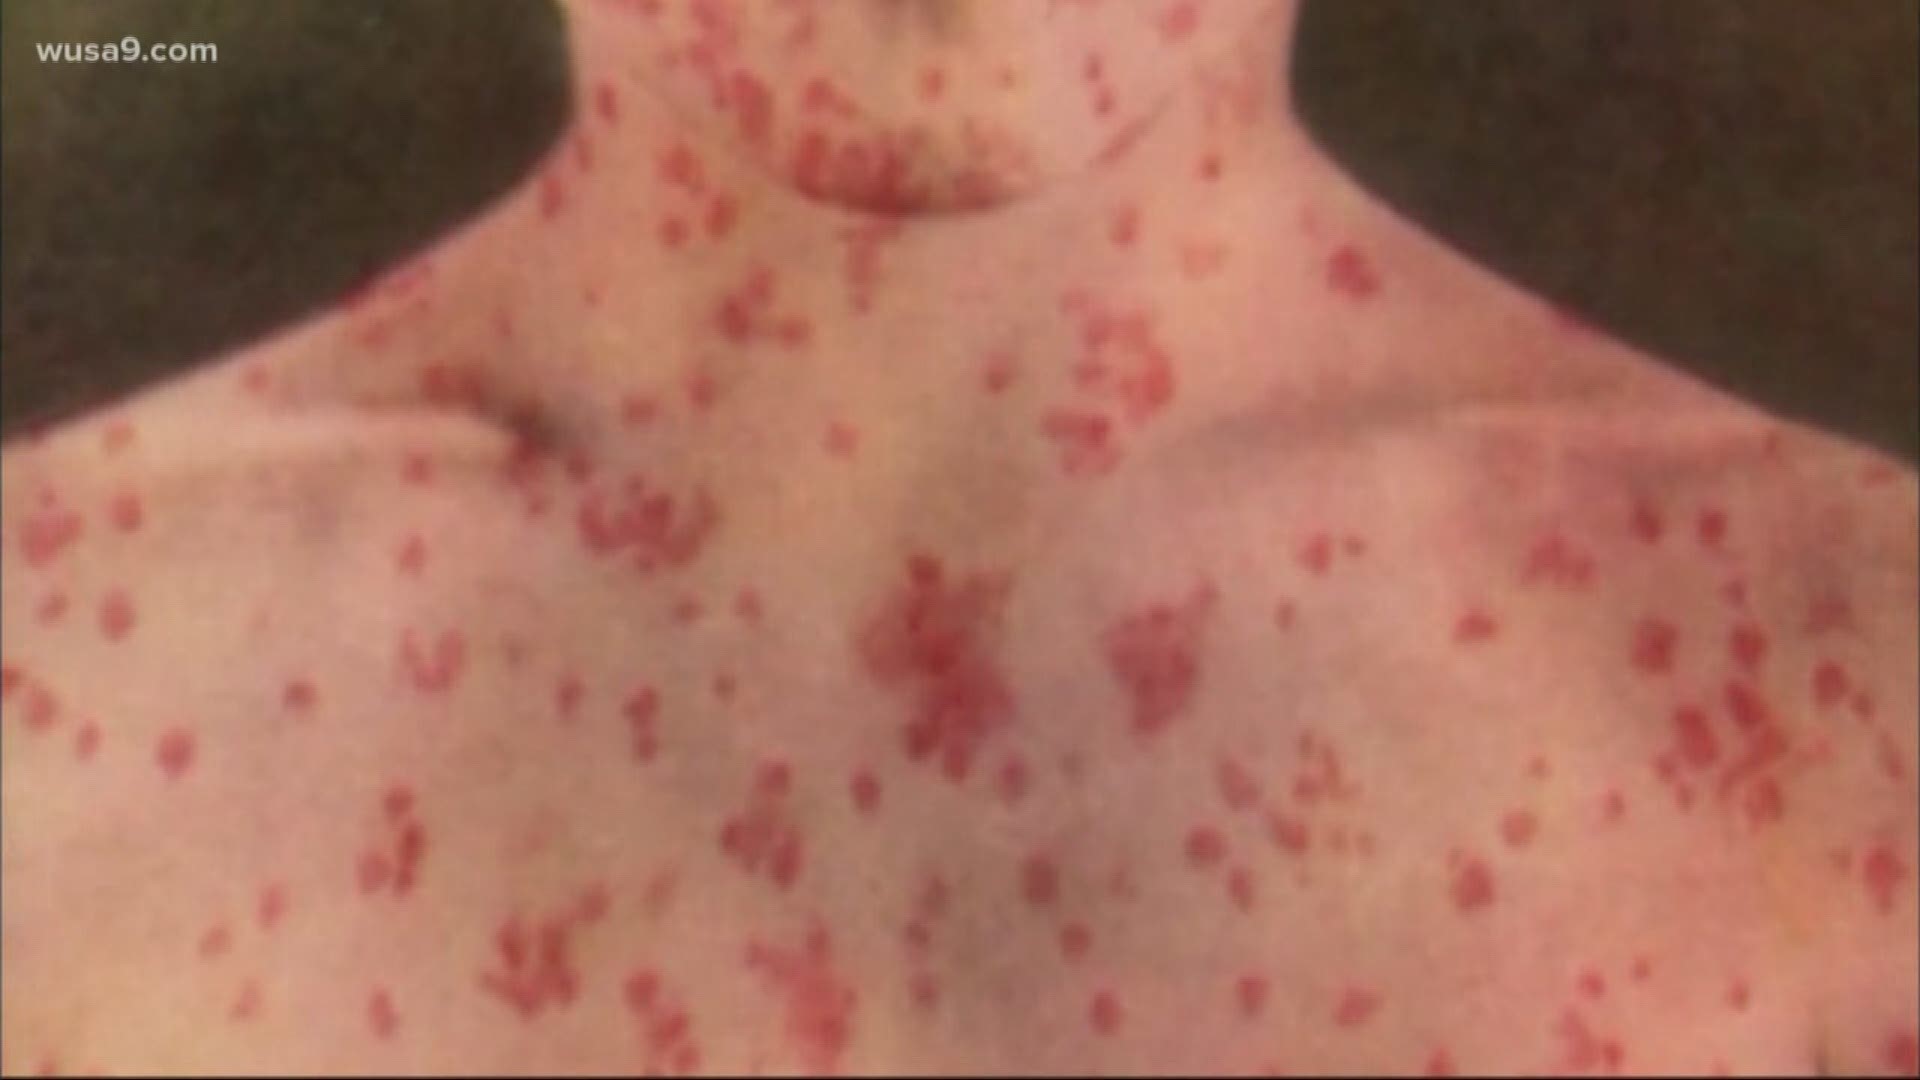 Health officials in St. Mary's County Maryland have gone silent after announcing they have a suspected case of measles that has turned up in the hospital there.